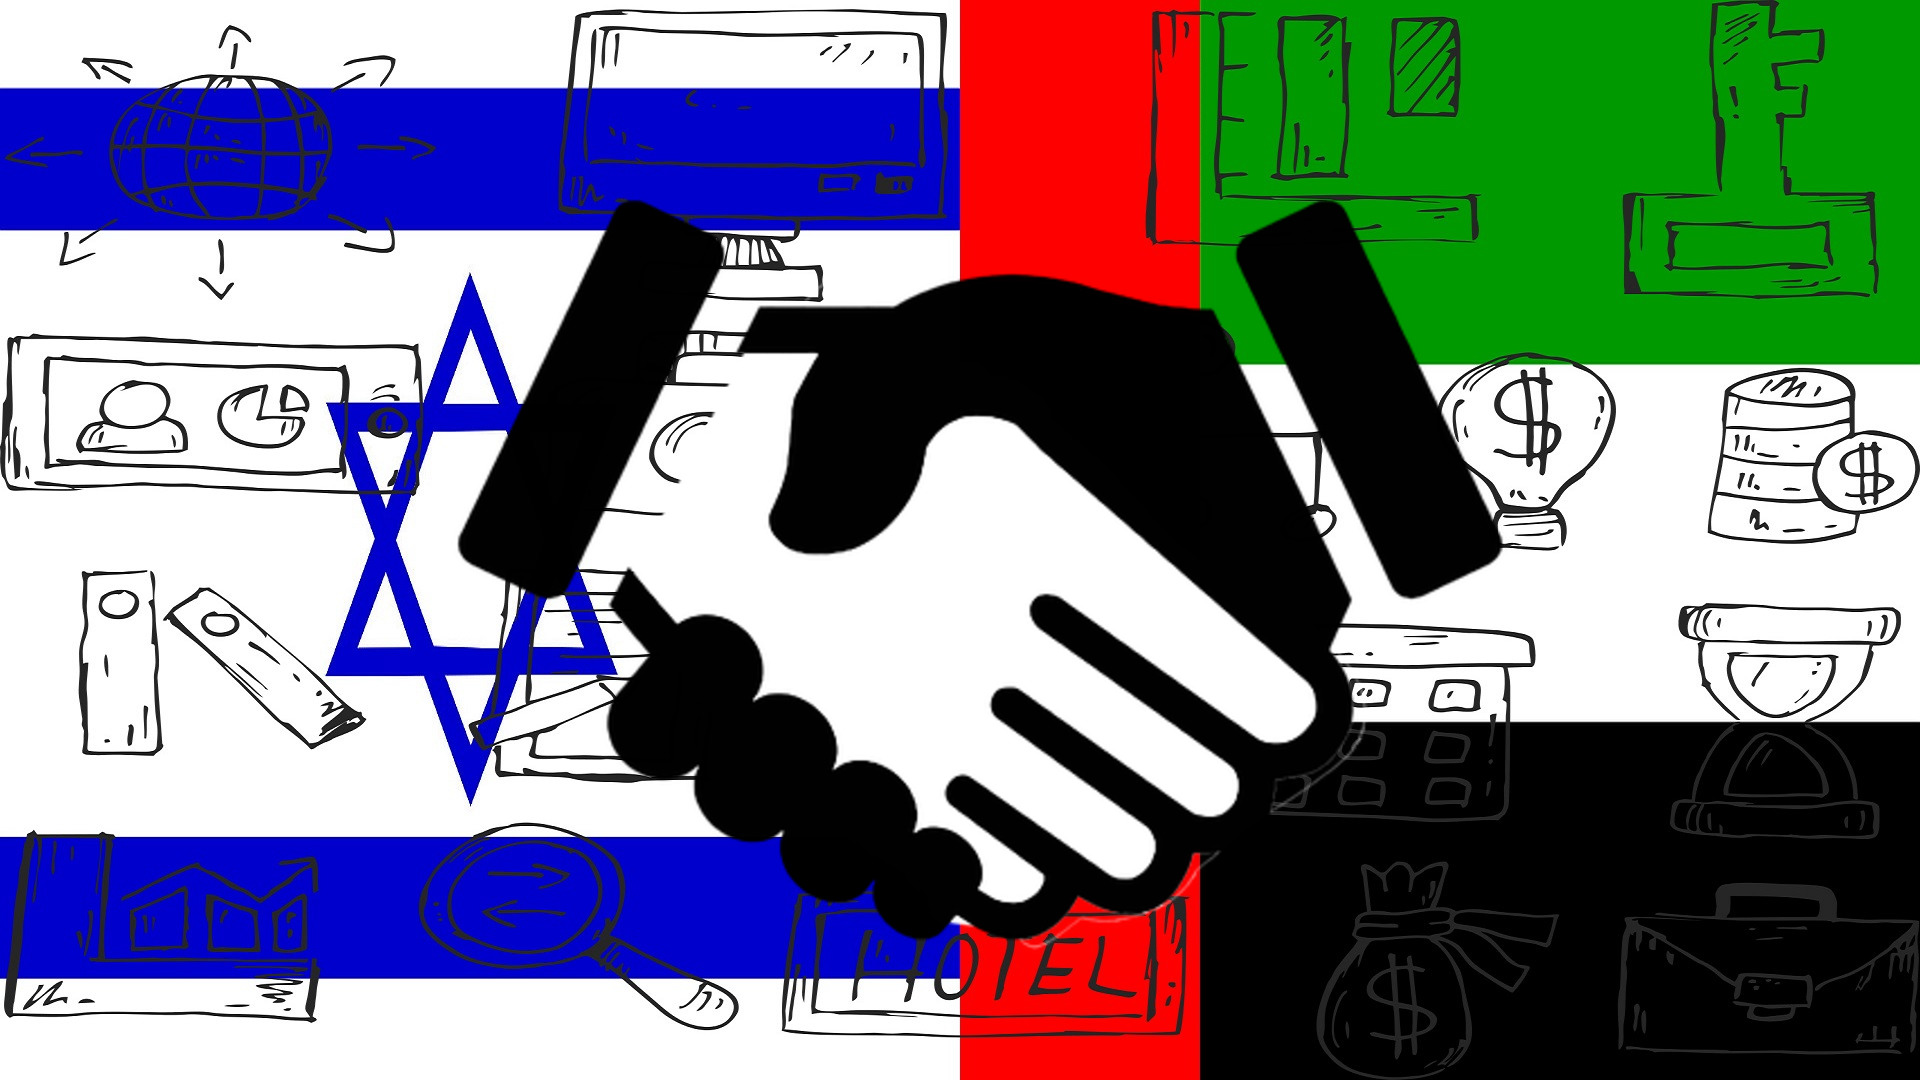 Israel, UAE to Cooperate on Financial Services, Investment